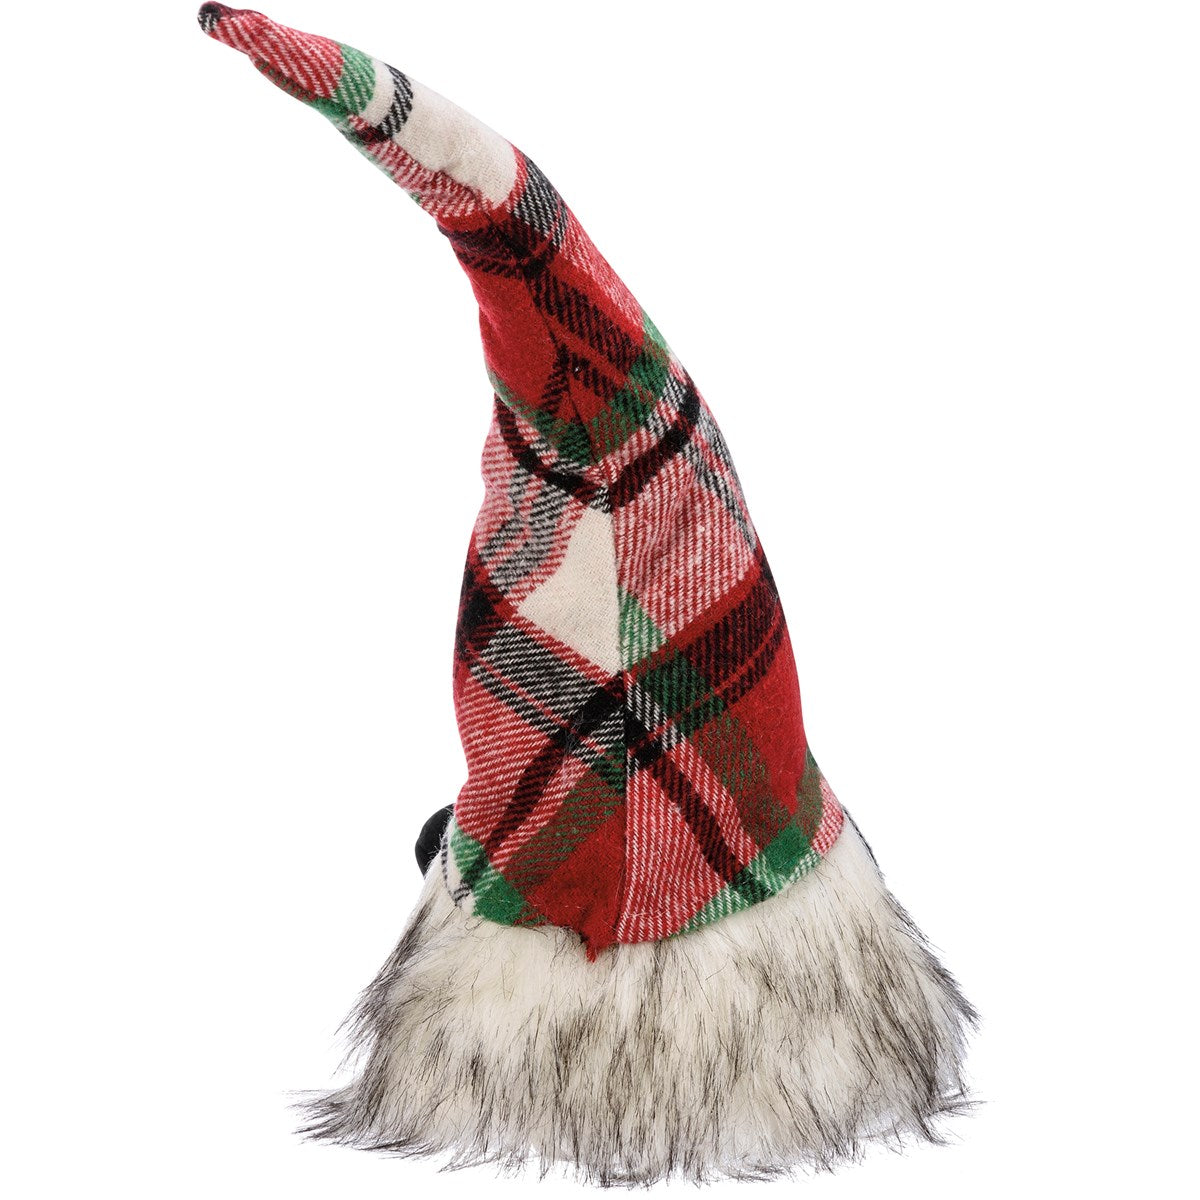 Christmas Plaid Gnome With Hanging Legs